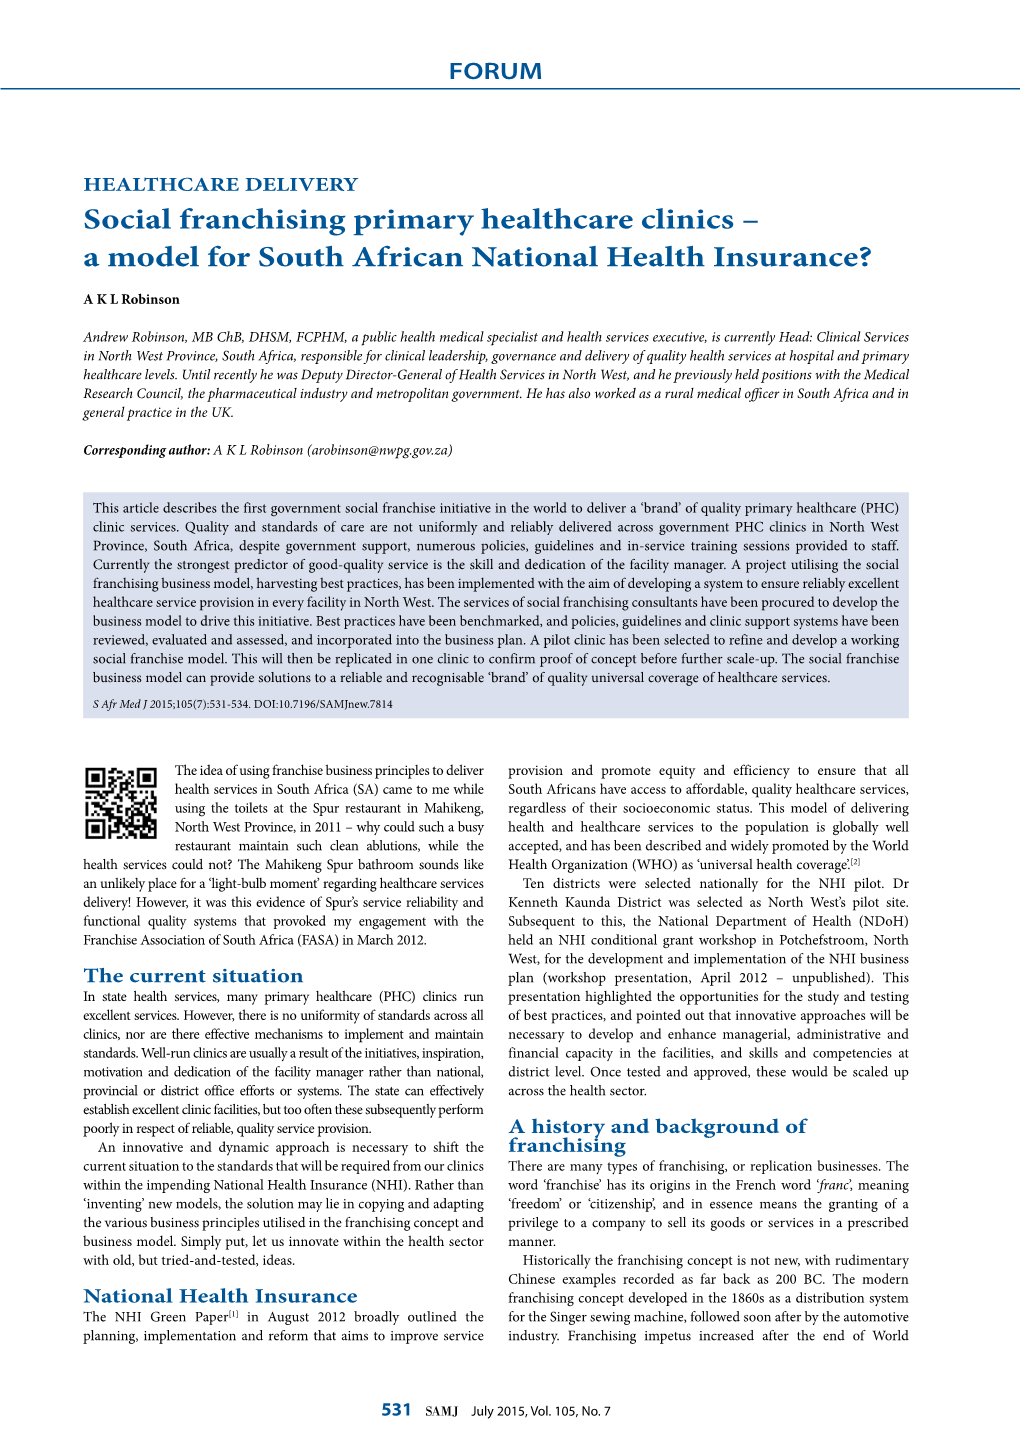 Social Franchising Primary Healthcare Clinics – a Model for South African National Health Insurance?